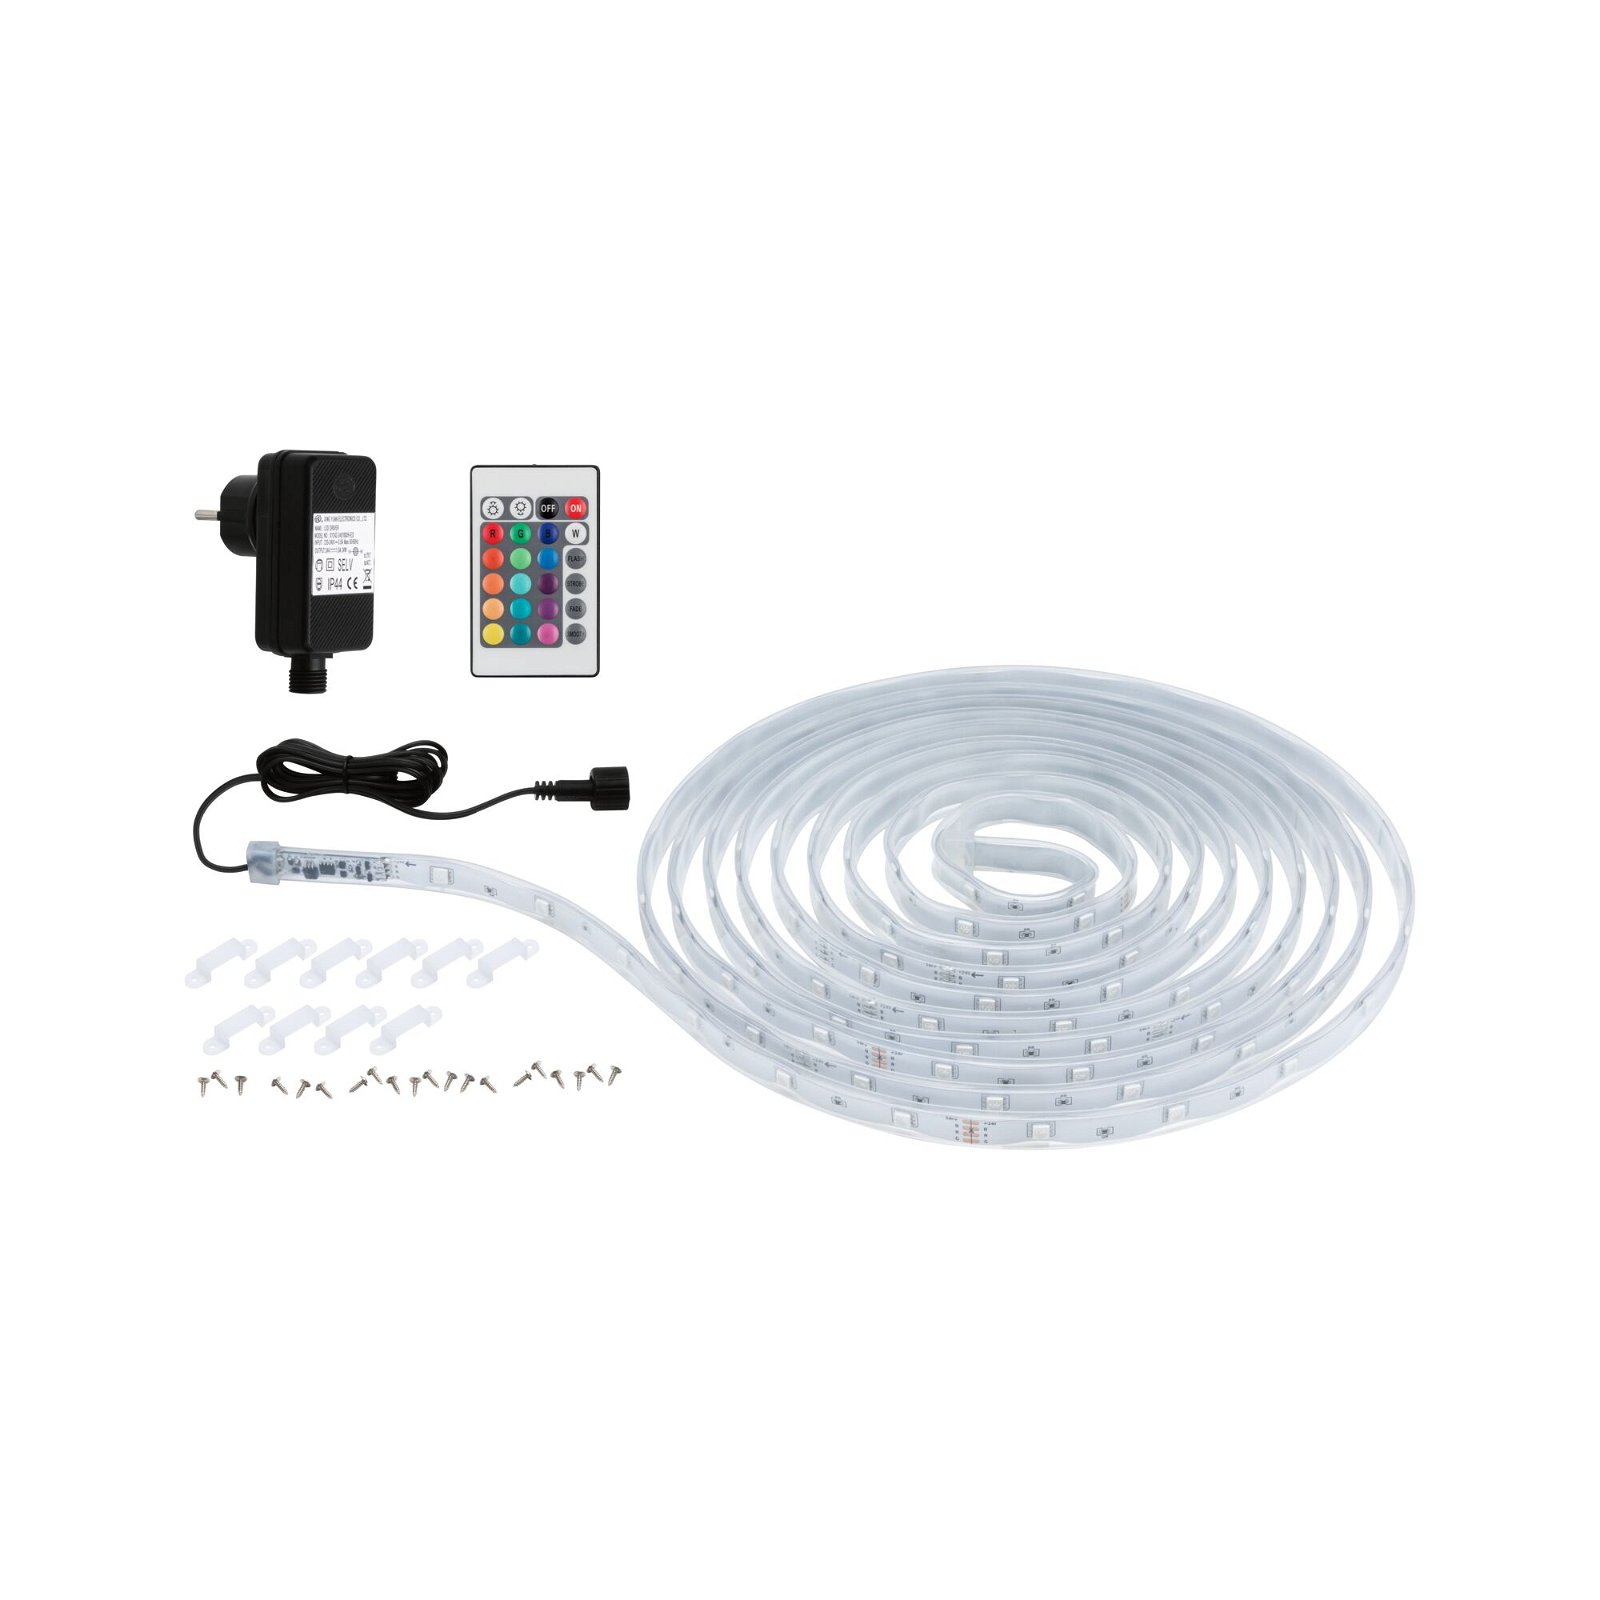 SimpLED LED Strip Outdoor Complete set 5m IP65 13W 45lm/m 24LEDs/m RGB